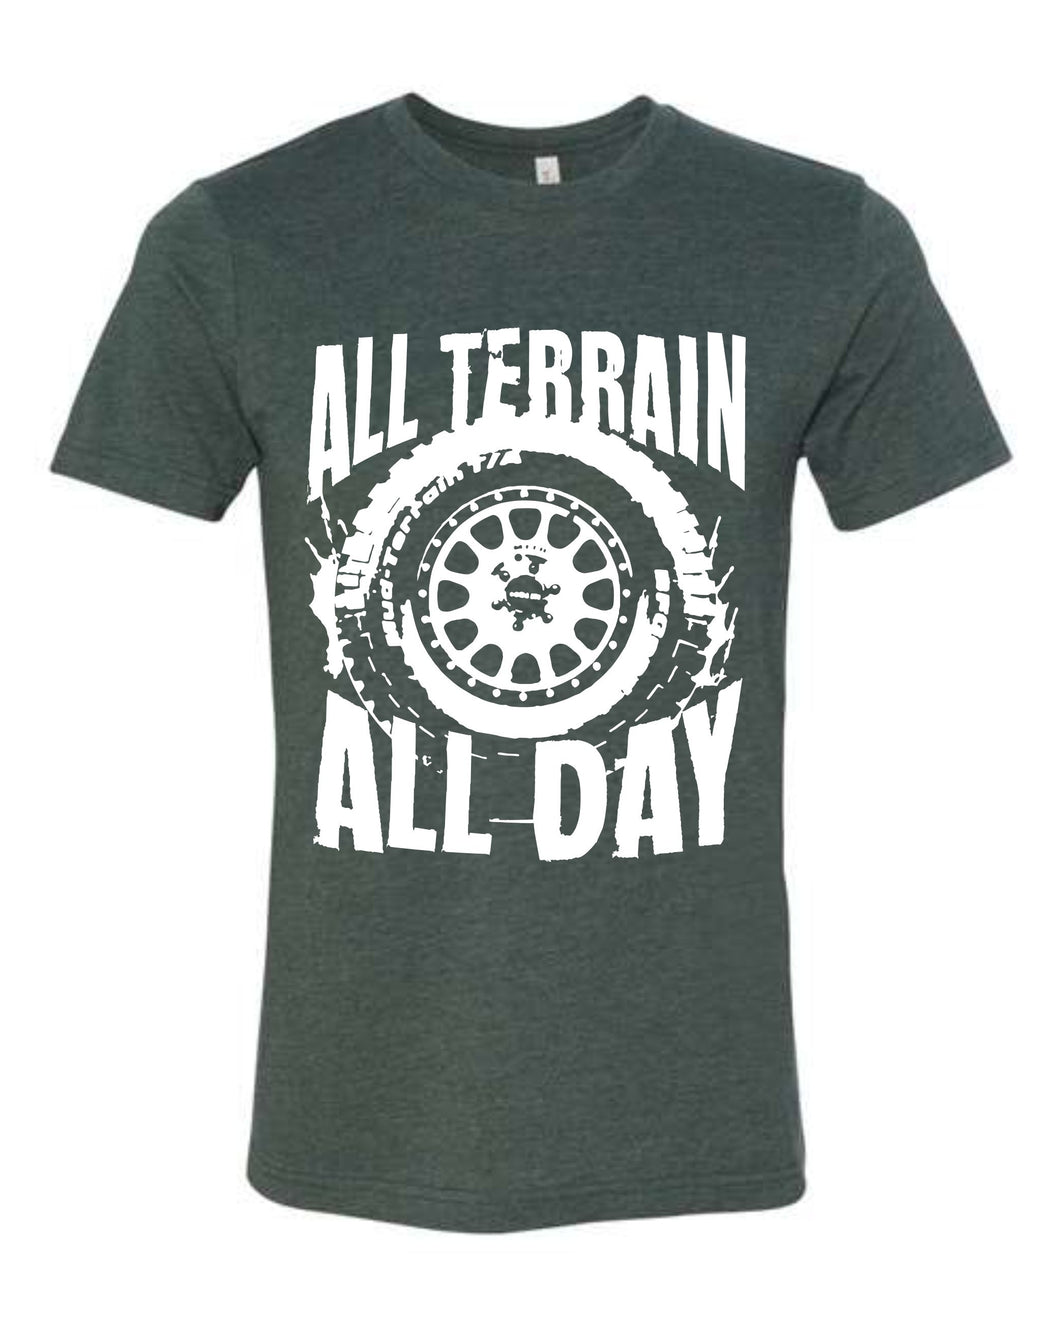 422 - All Terrain All Day (Back Only)